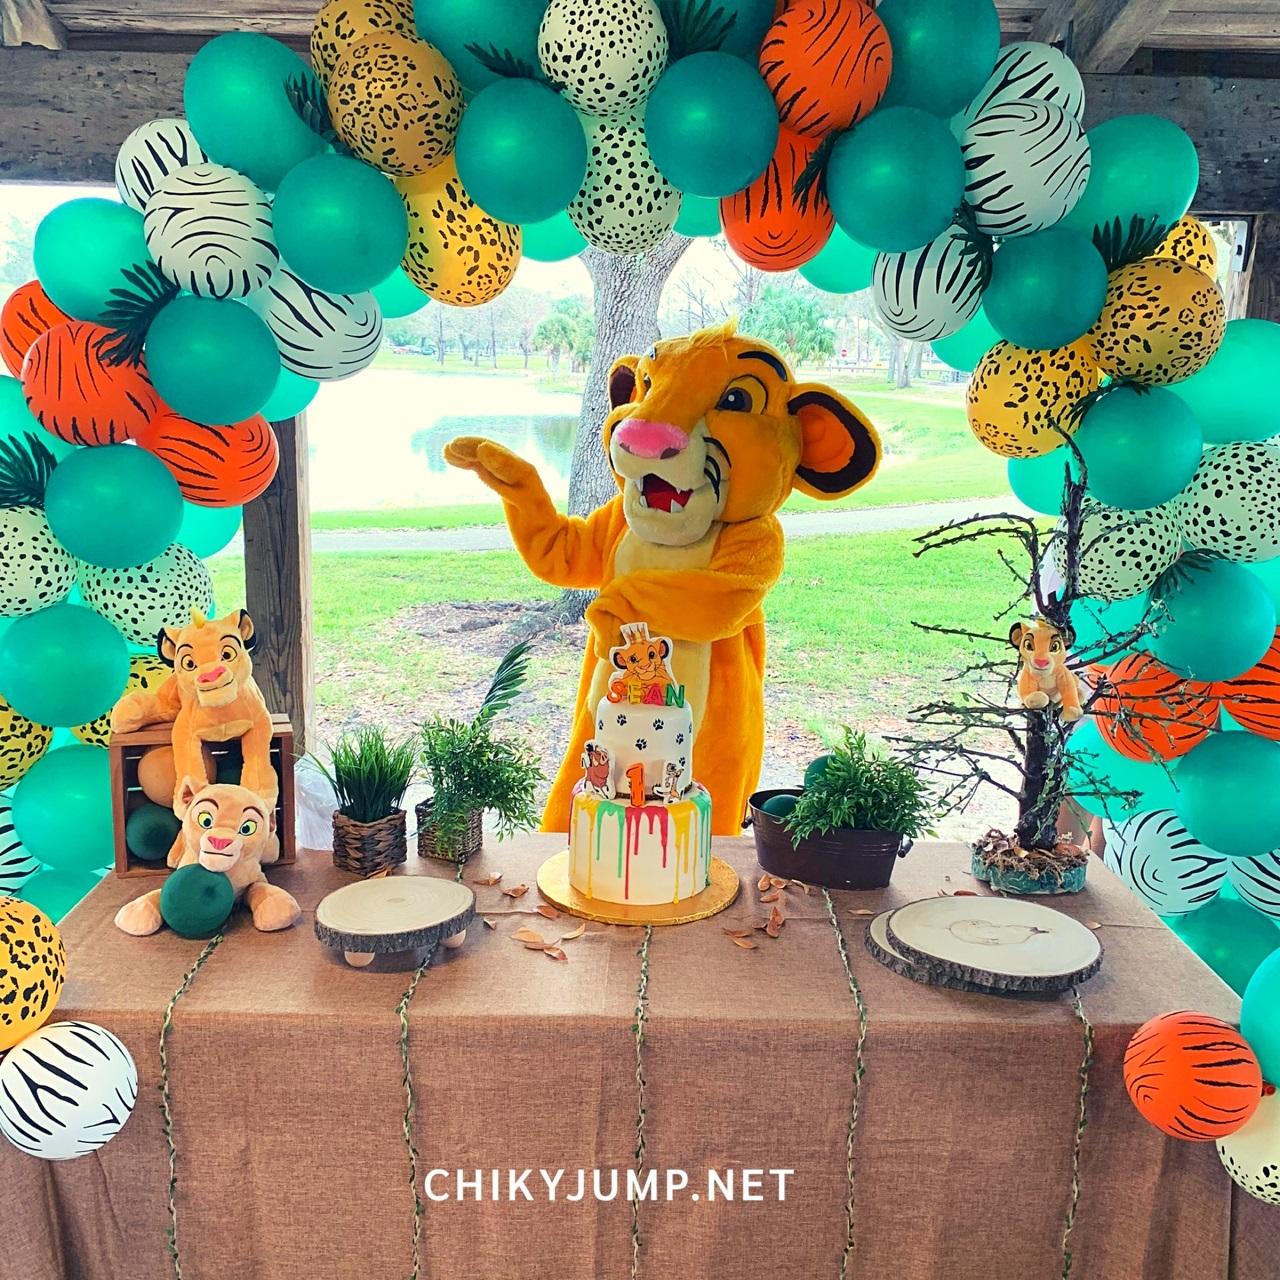 Lion King Birthday Theme, Party Decorations